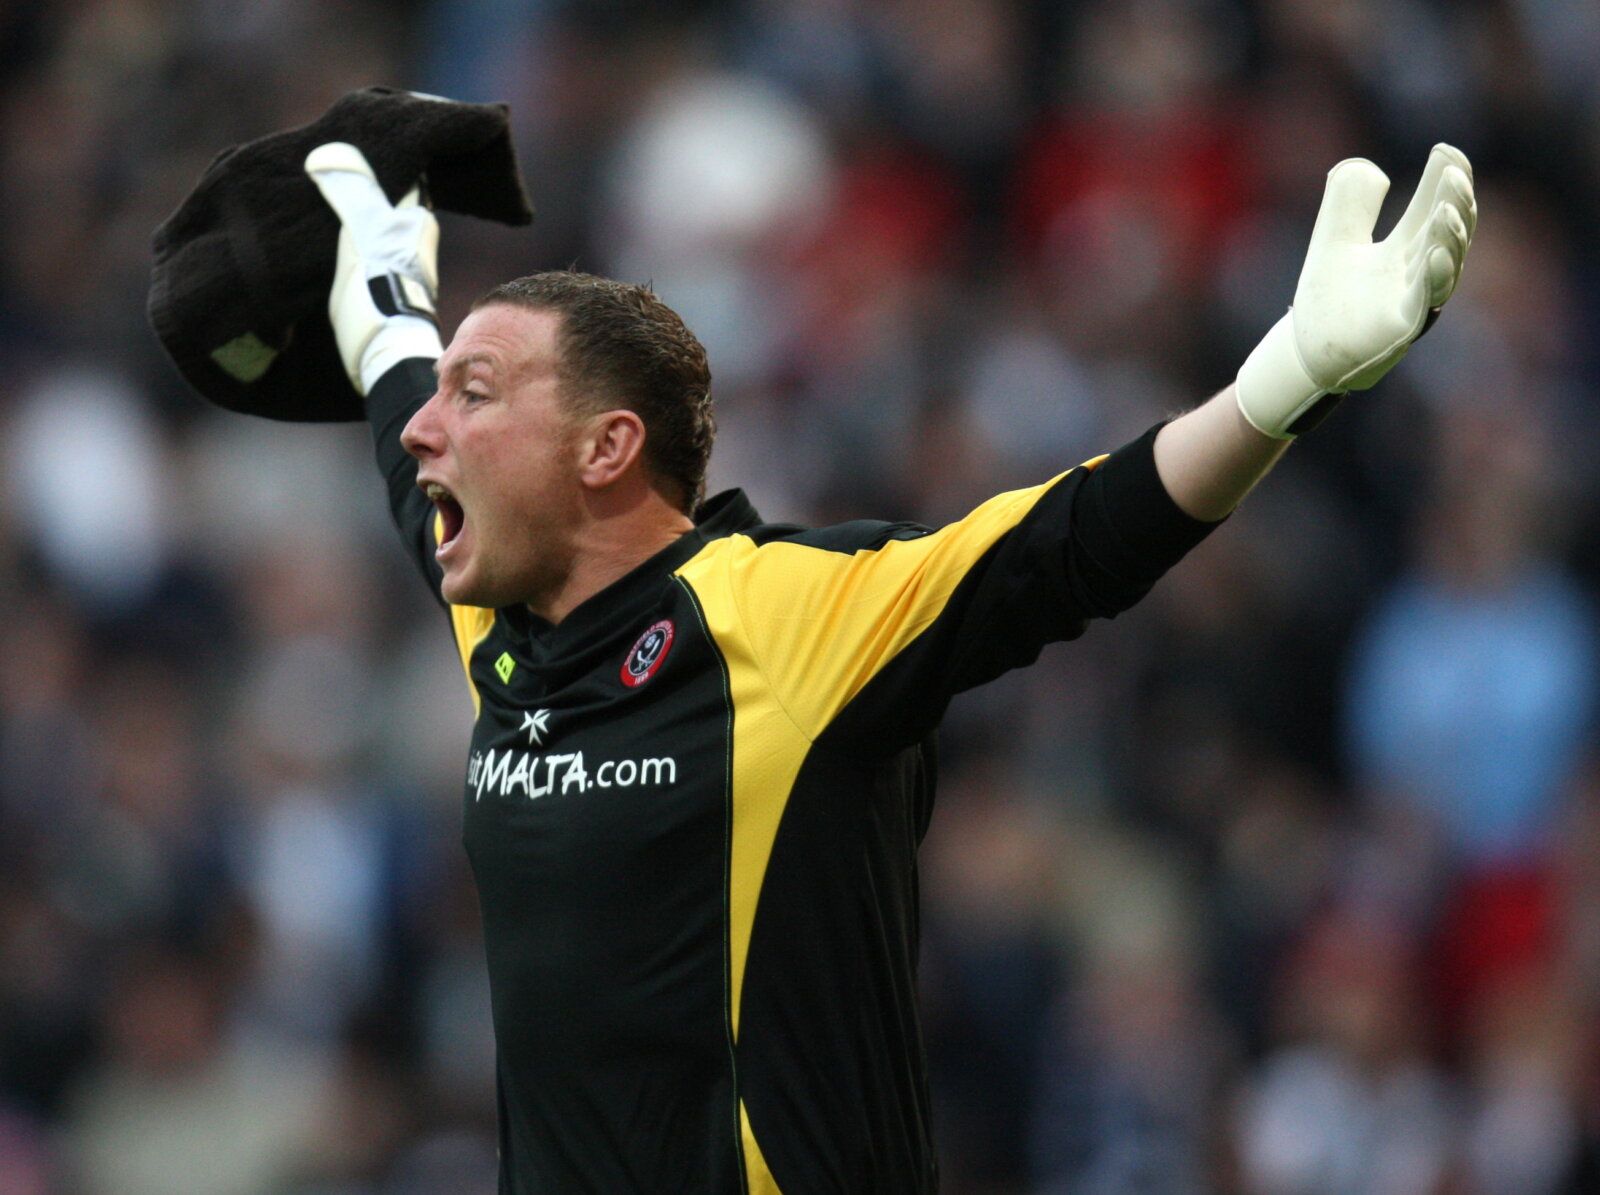 Football - Stock - 08/09 - 8/5/09 
Paddy Kenny - Sheffield United 
Mandatory Credit: Action Images / Carl Recine